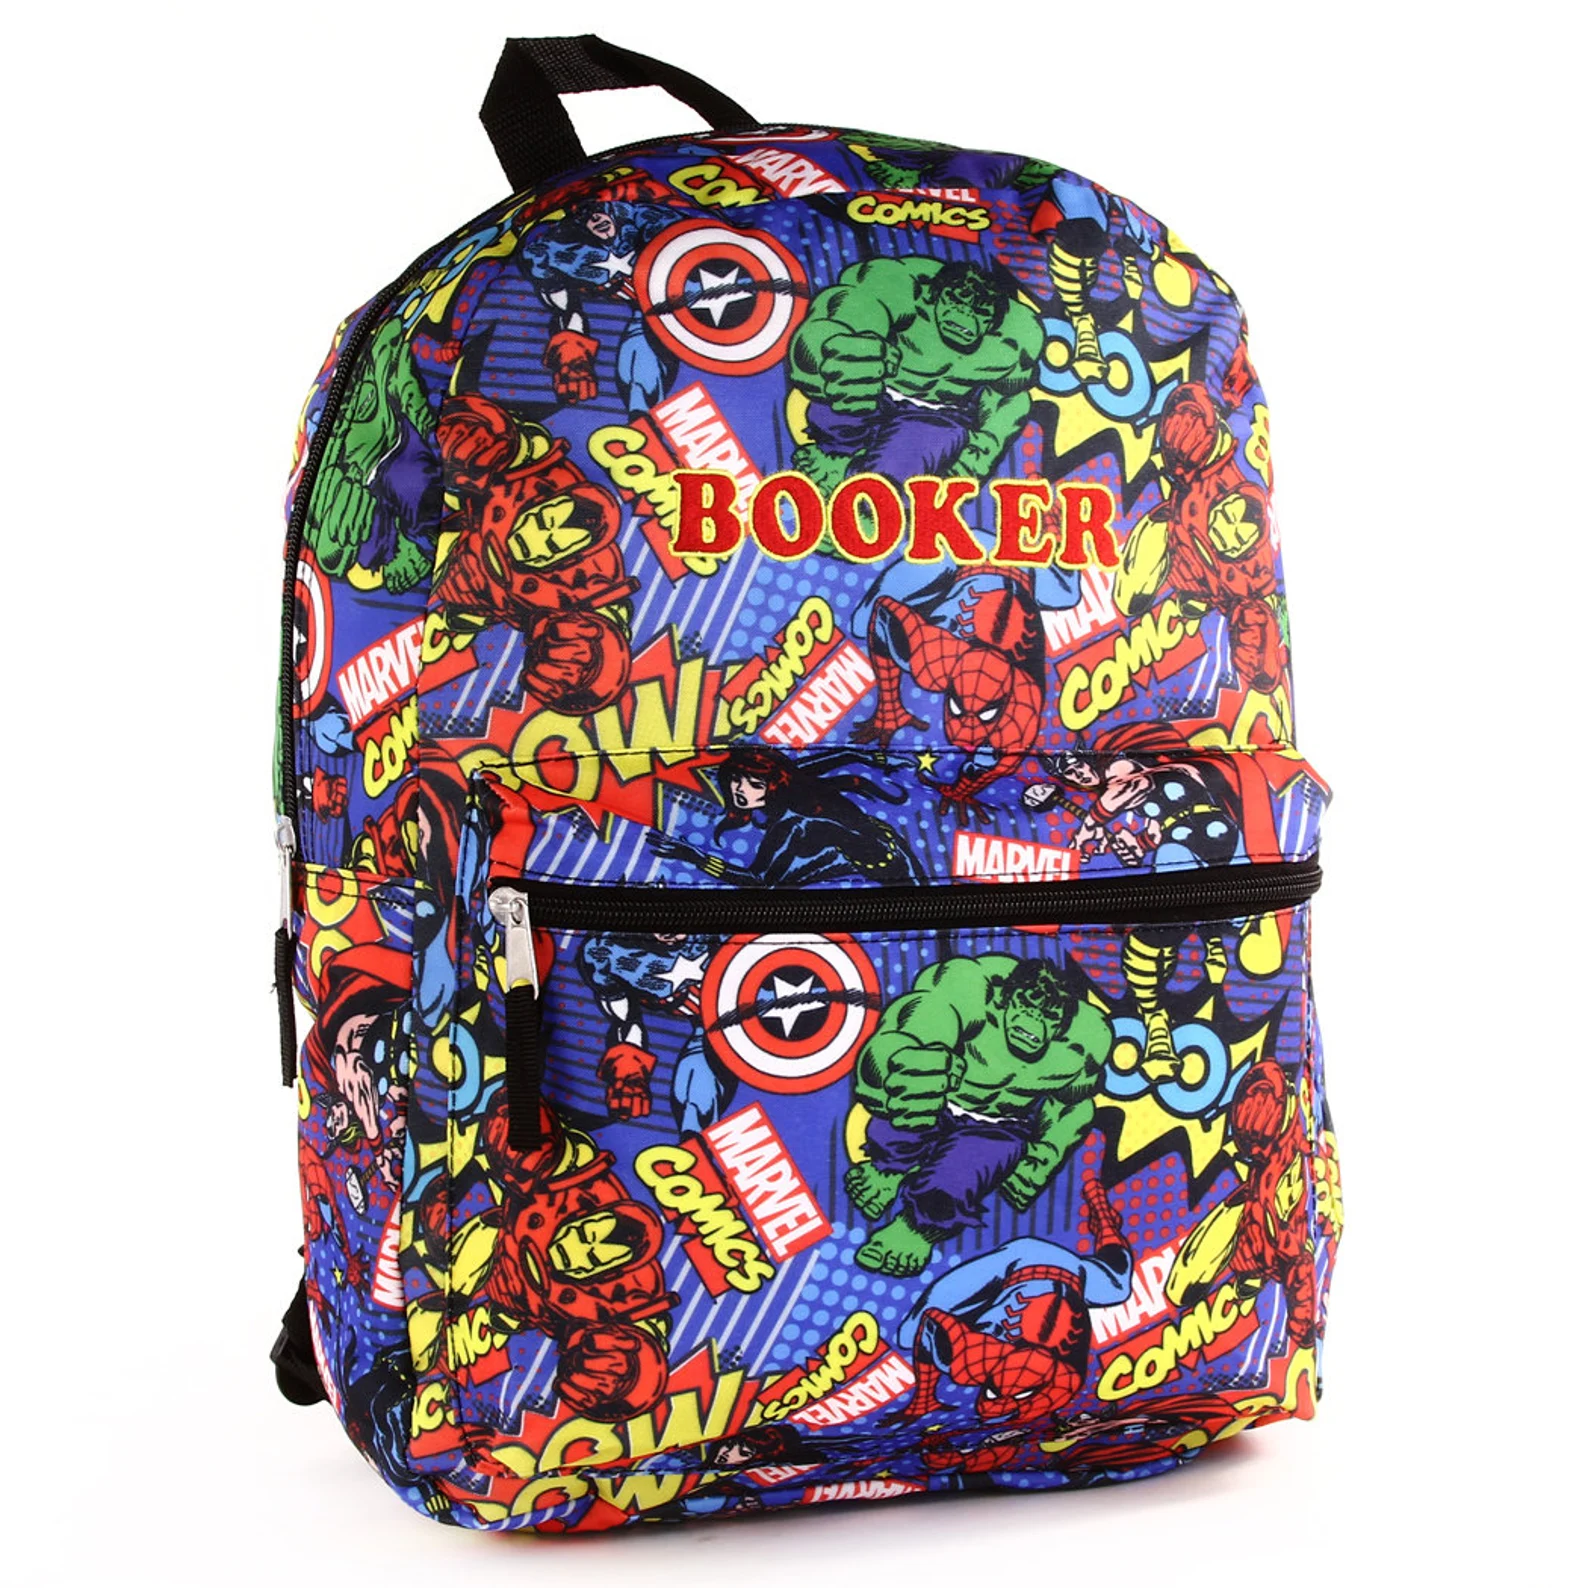 A backpack showing a collage of comic book characters from the MCU along with embroidered text that says Booker